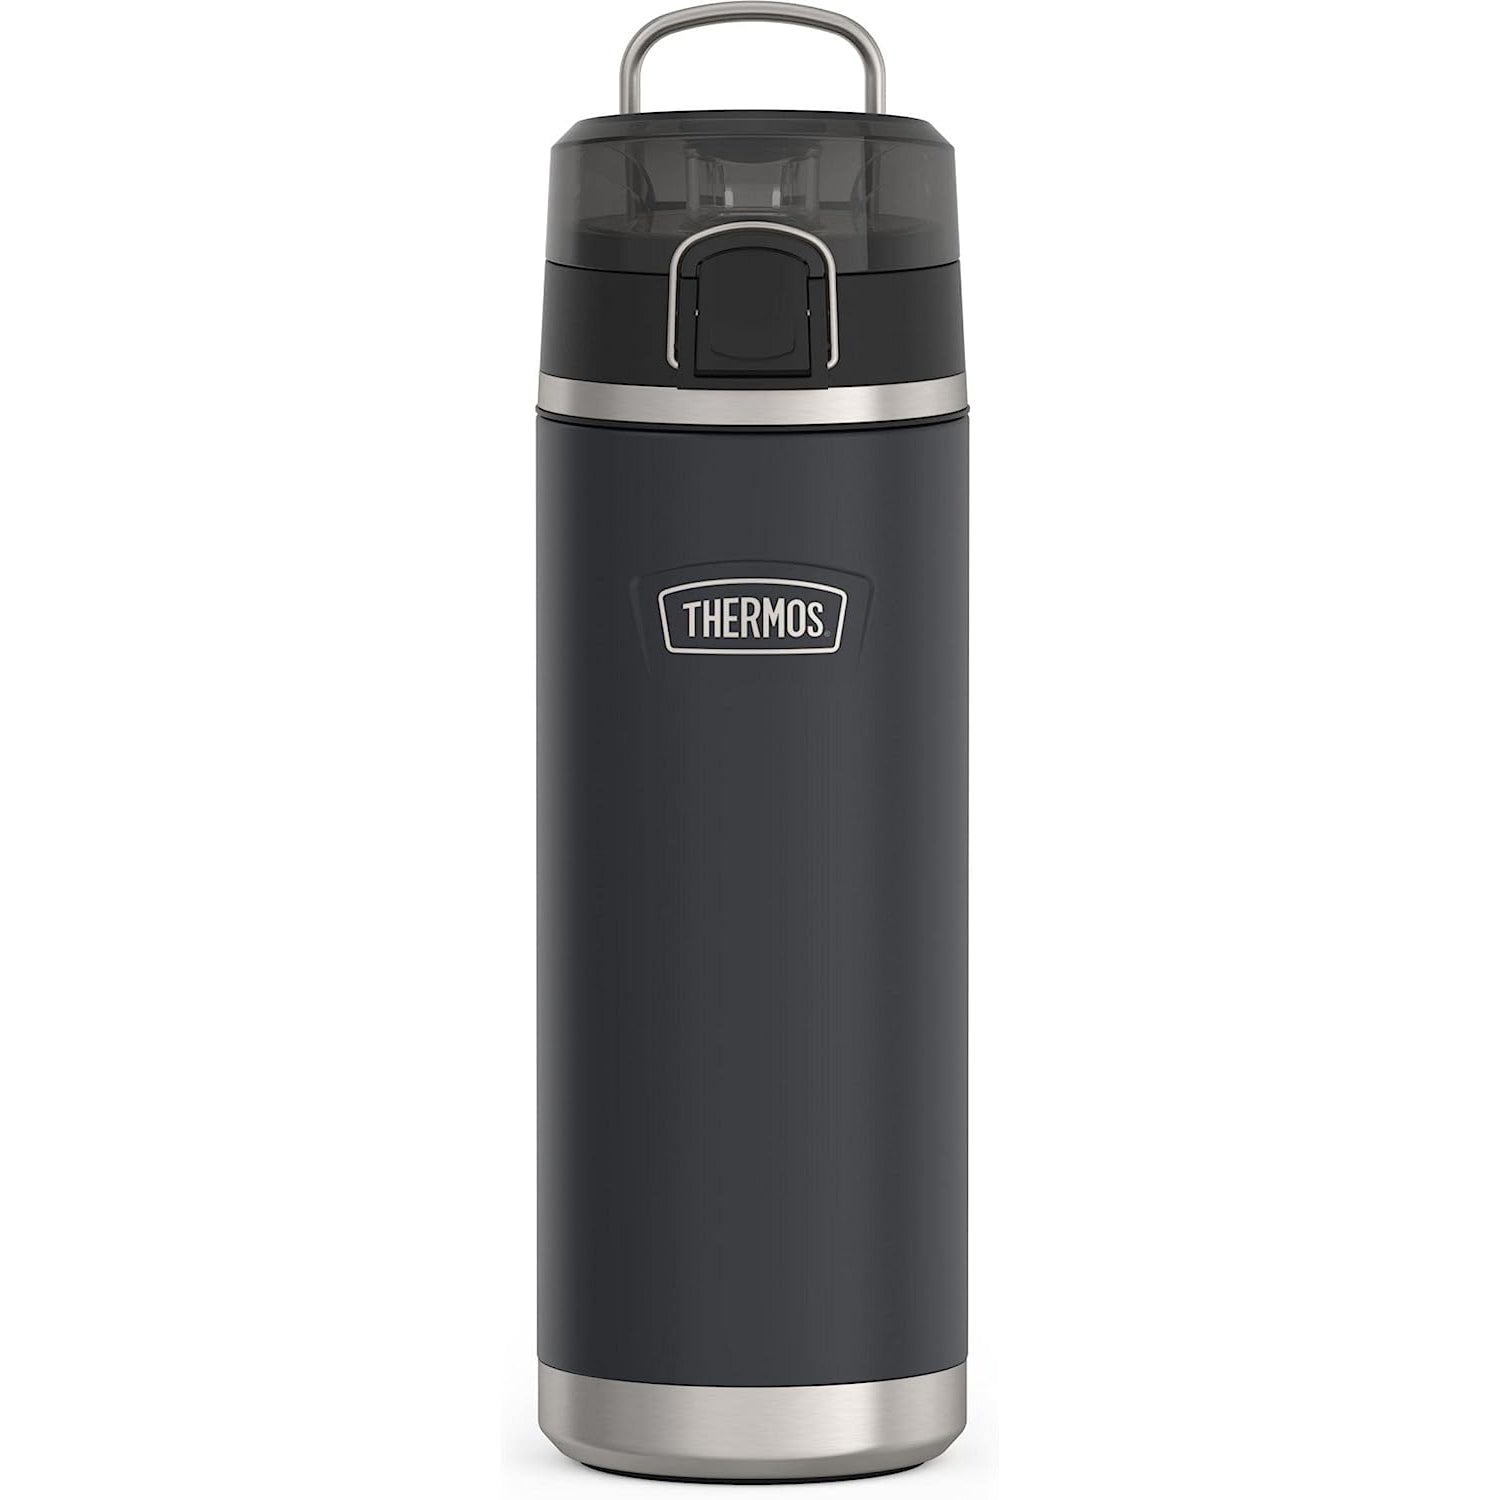 ICON Series by THERMOS Stainless Steel Water Bottle with Spout 24 Ounce, Graphite